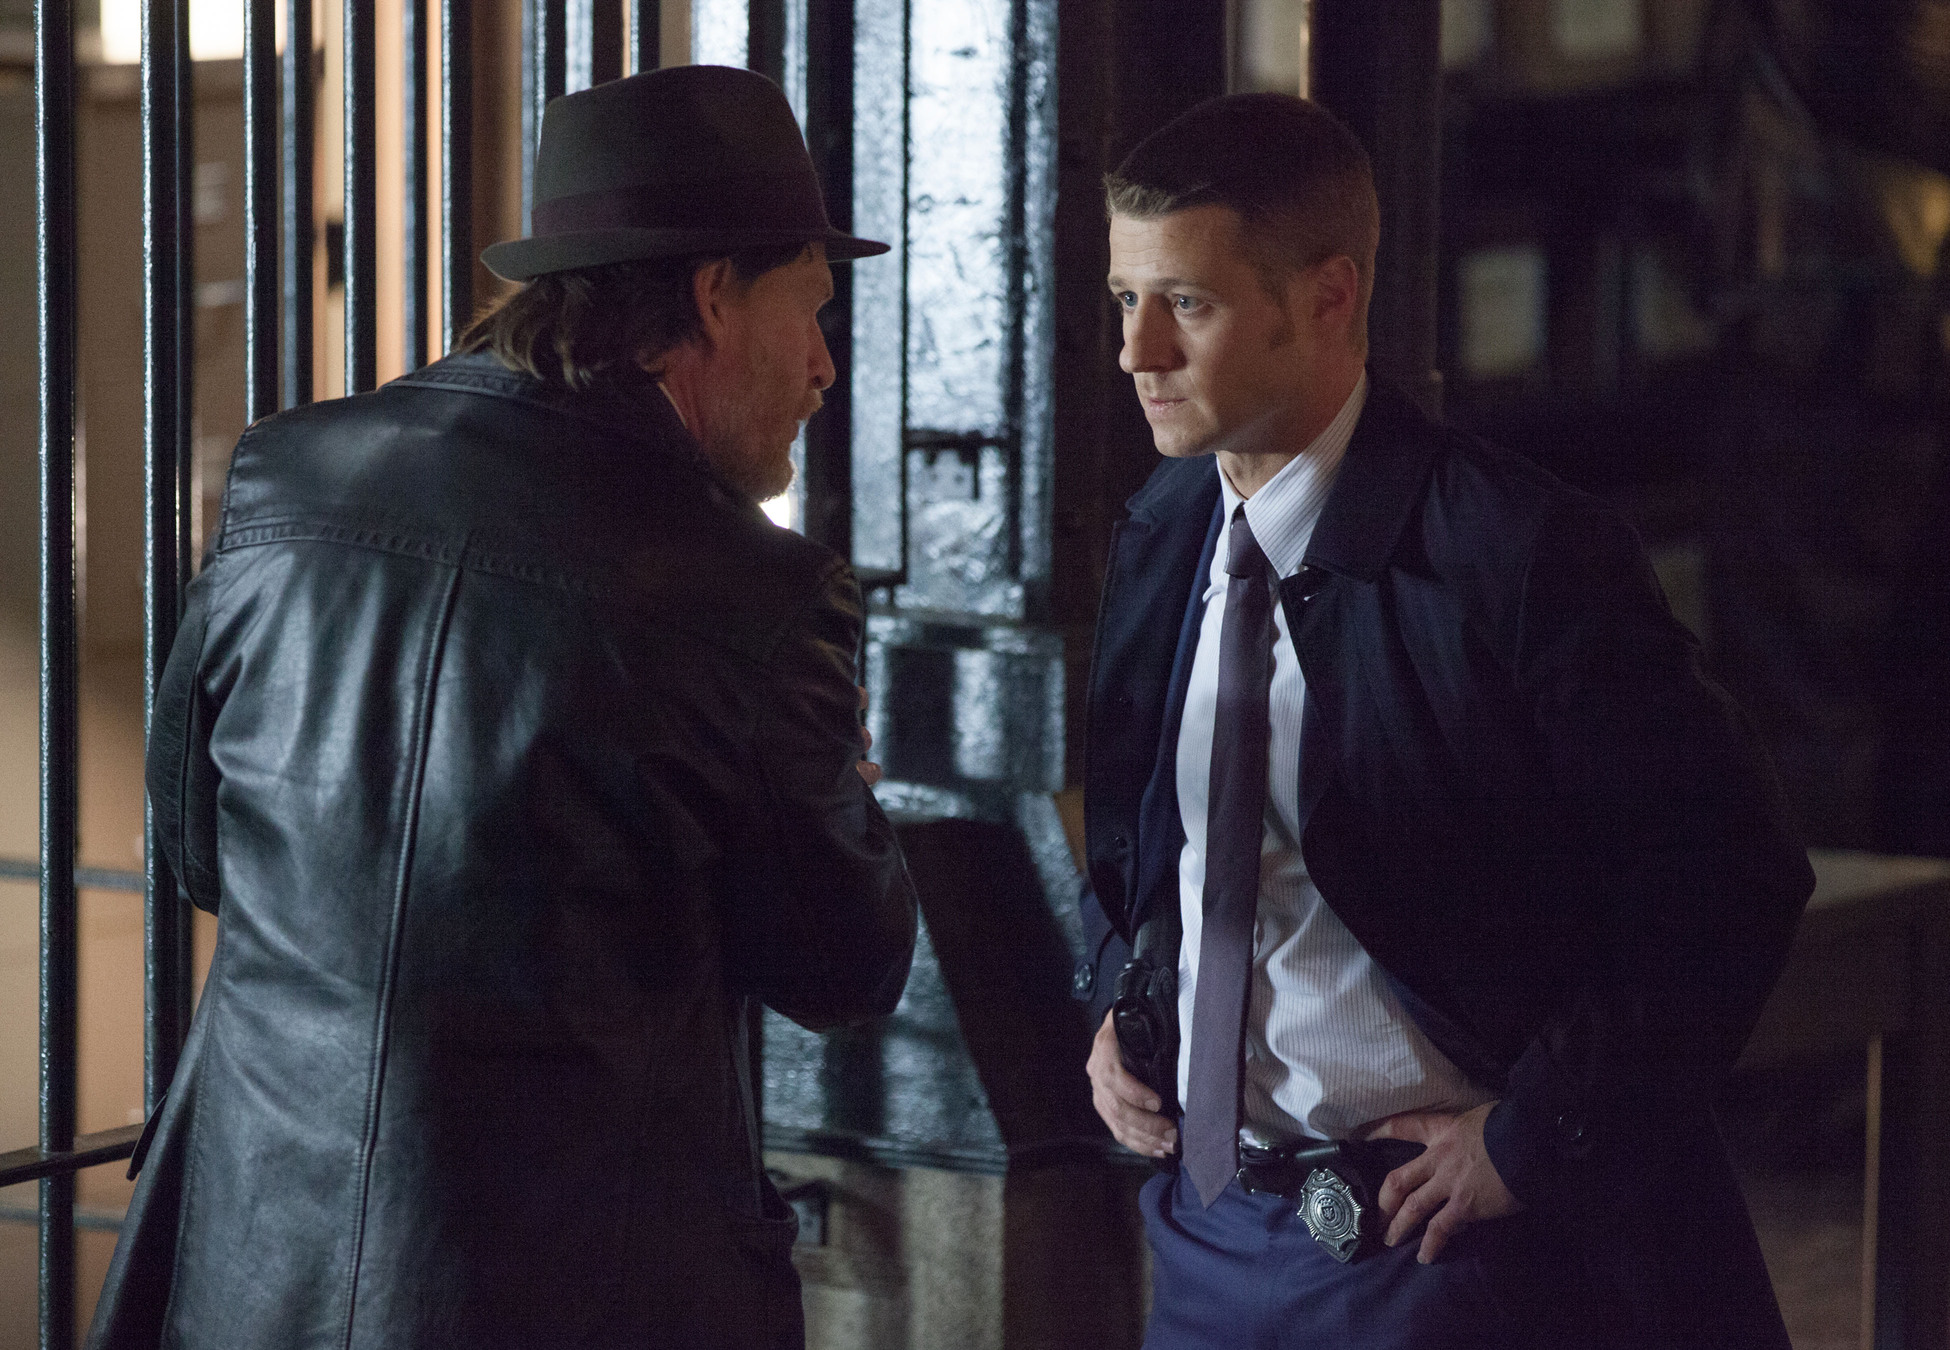 GOTHAM: Detectives James Gordon (Ben McKenzie, R) and Harvey Bullock (Donal Logue, L) disagree about ethics in the "The Mask" episode of GOTHAM airing Monday, Nov. 10 (8:00-9:00 PM ET/PT) on FOX. Â©2014 Fox Broadcasting Co. Cr: Jessica Miglio/FOX